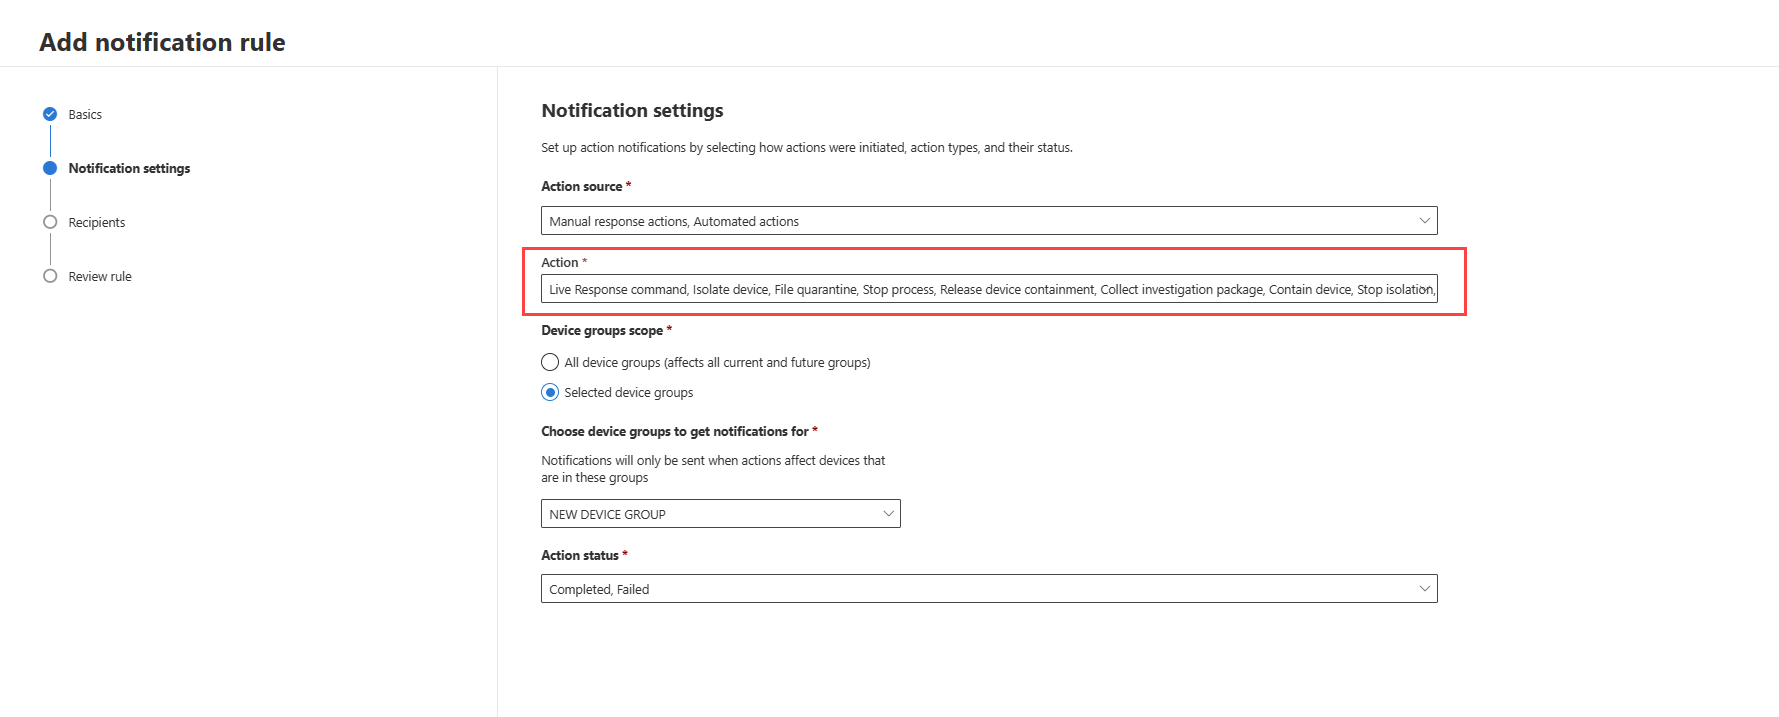 Highlighting the Actions field in the Notification settings section of the add notification rule